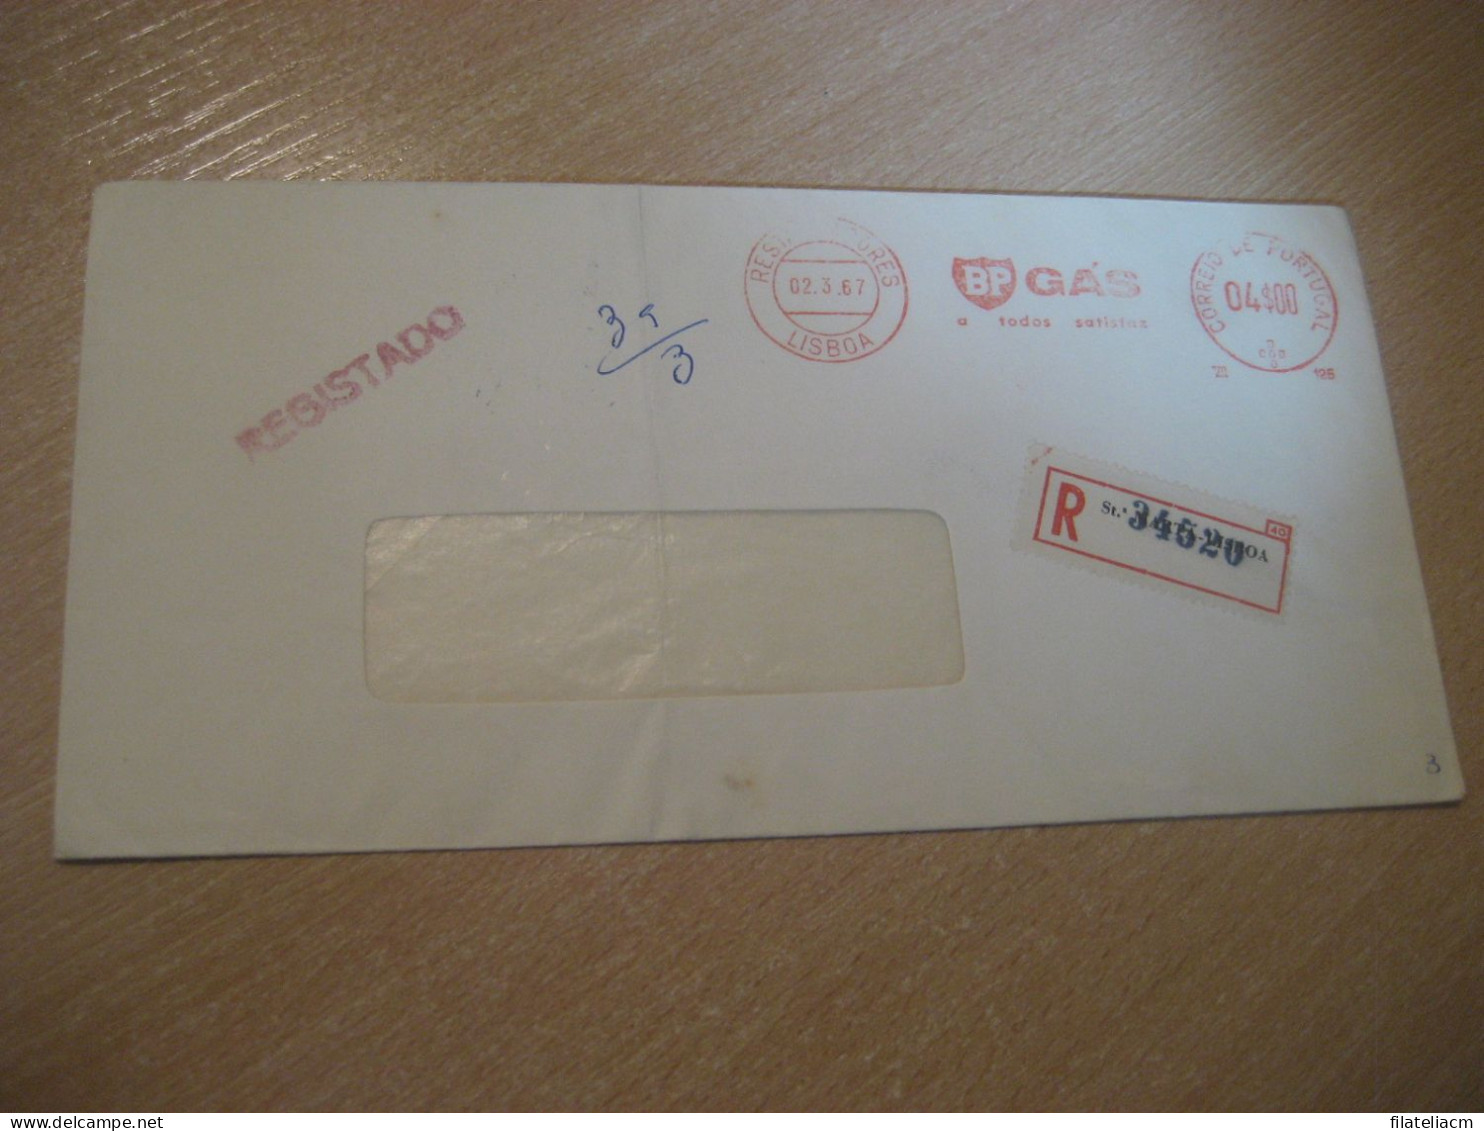 LISBOA 1967 BP Gas Oil Registered Meter Mail Cancel Cover PORTUGAL - Lettres & Documents